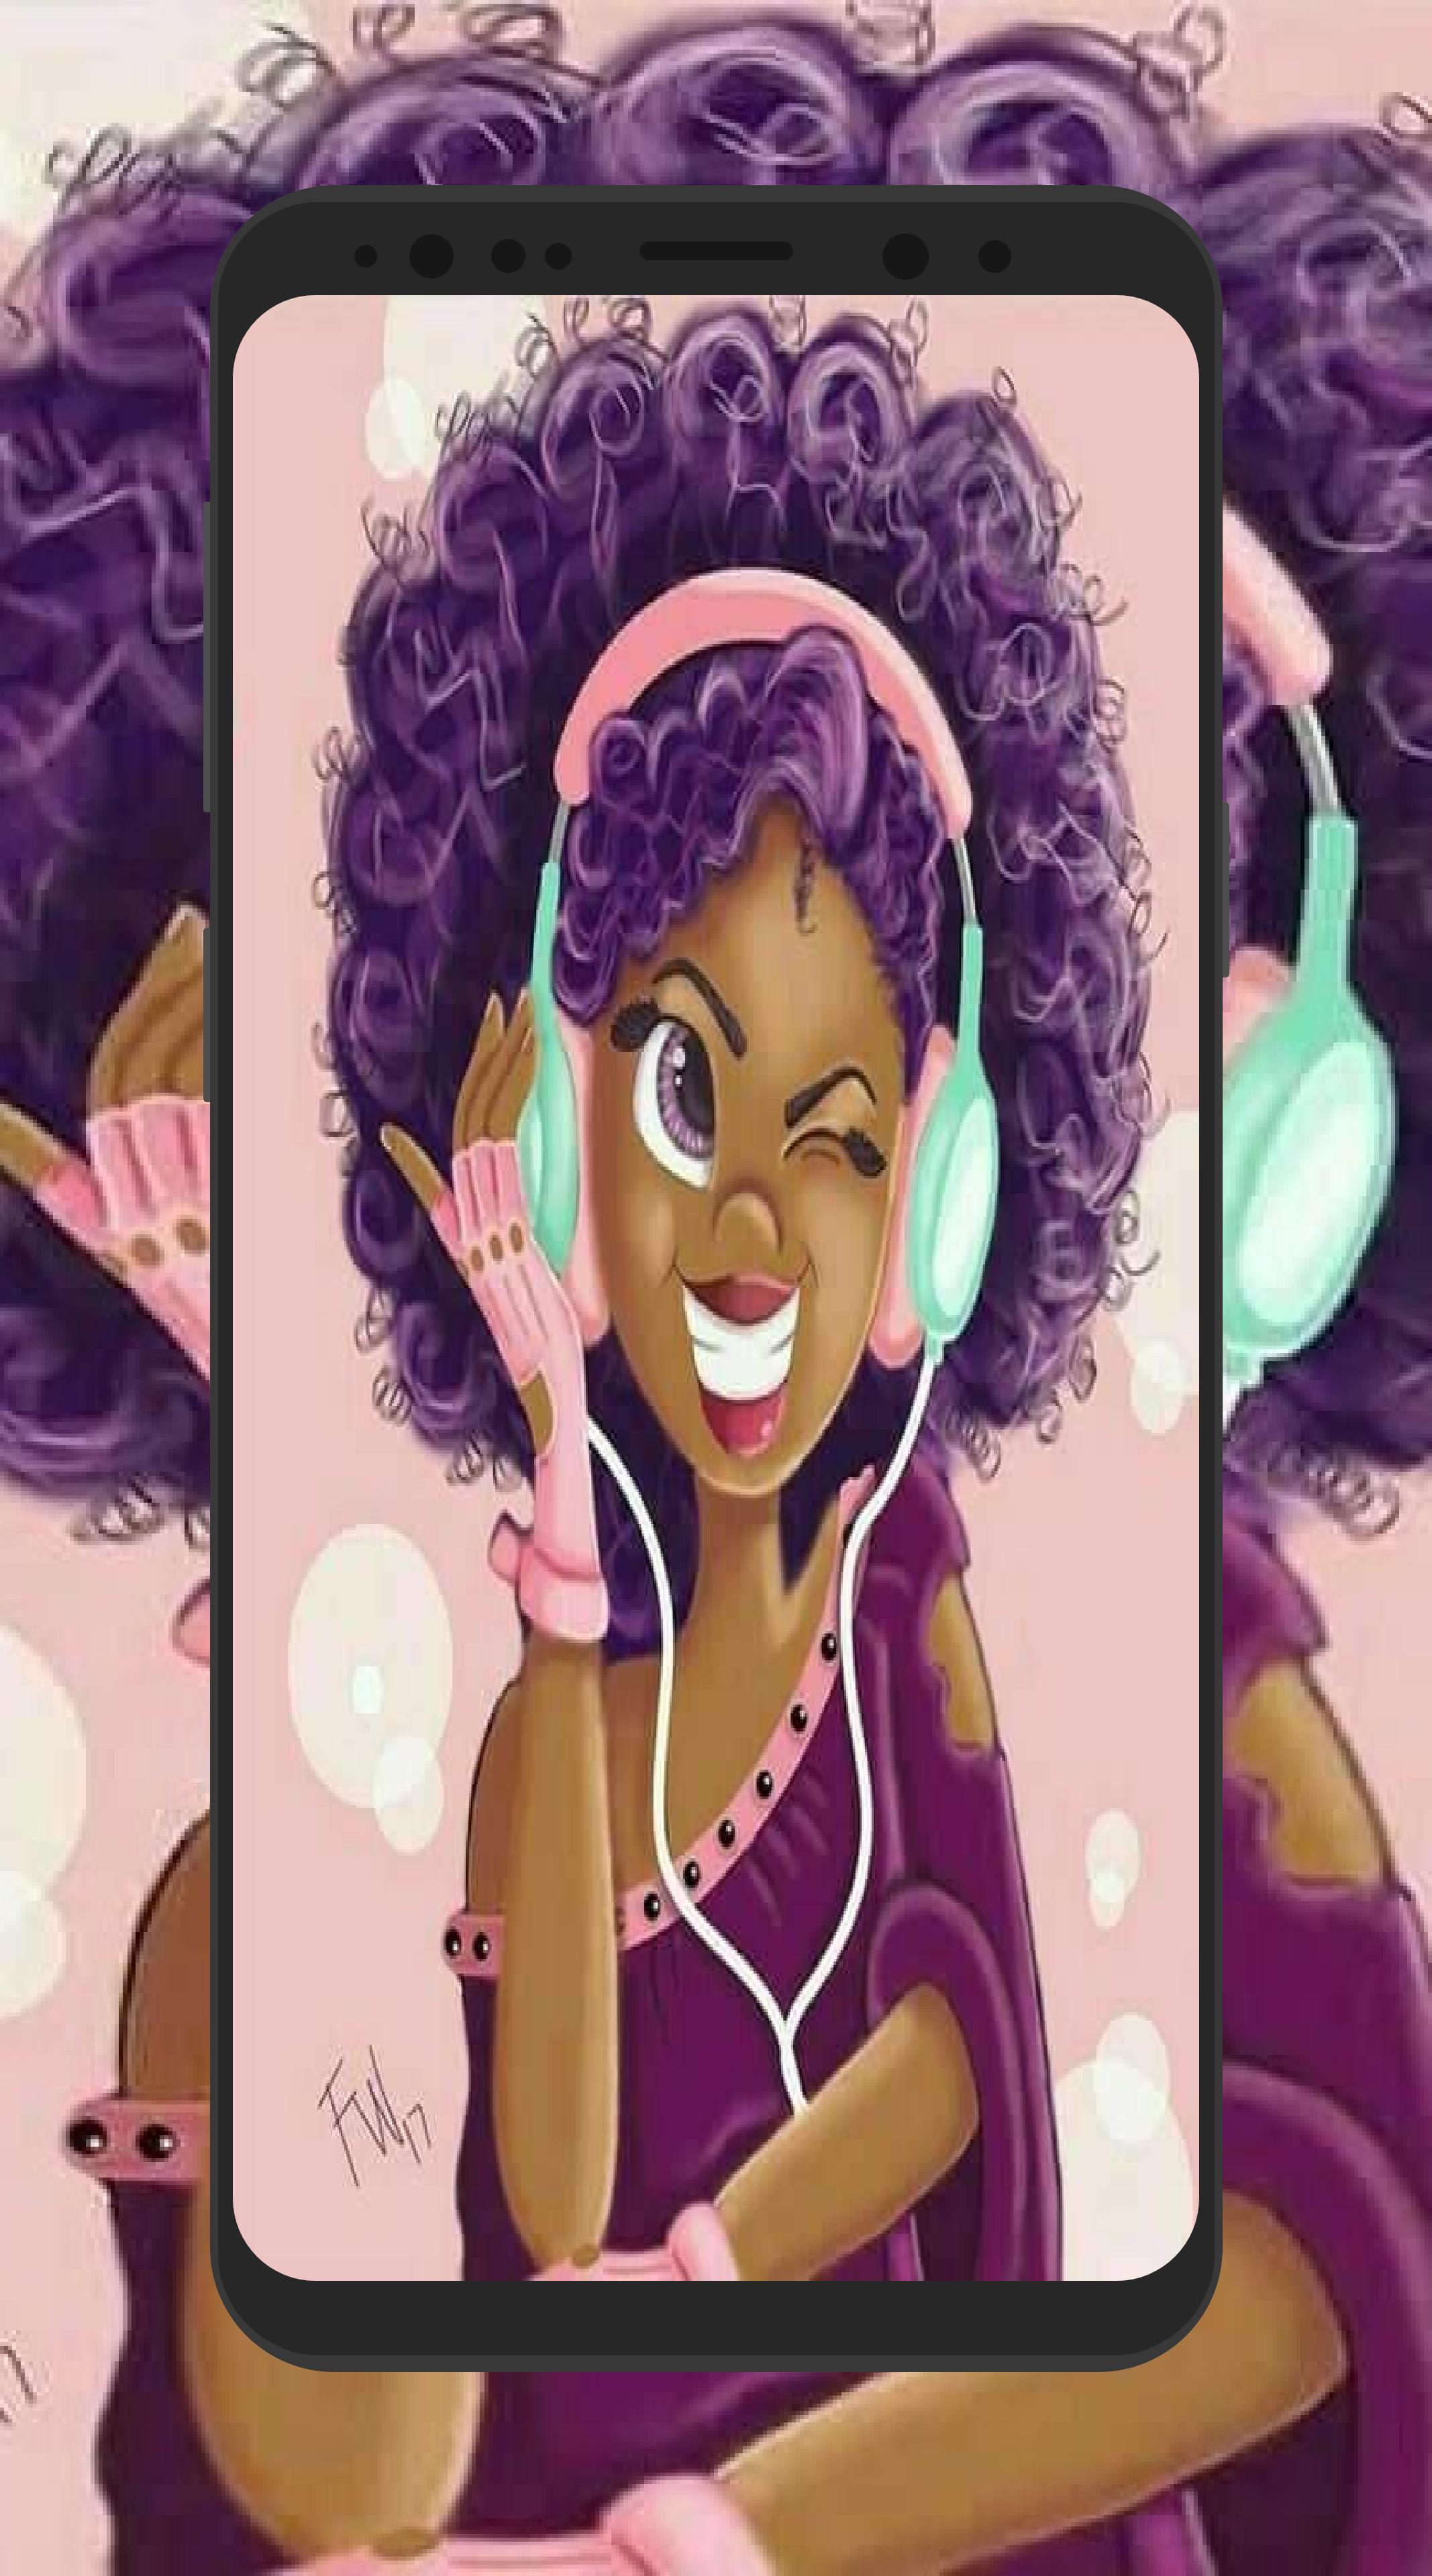 Melanin Wallpapers Girly Cute Girls For Android Apk Download